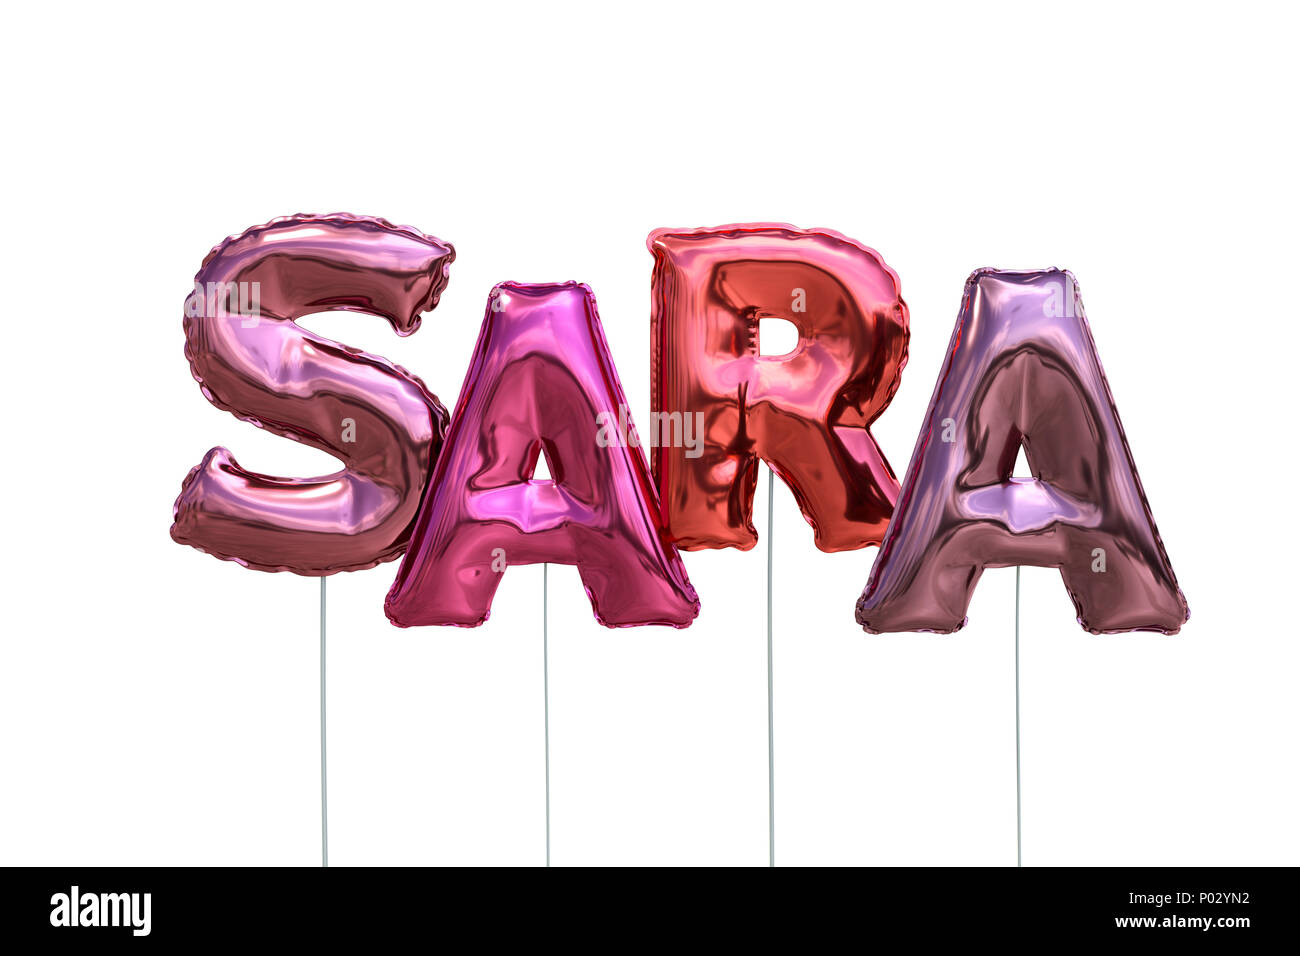 Name sara made of pink inflatable balloons isolated on white background Stock Photo